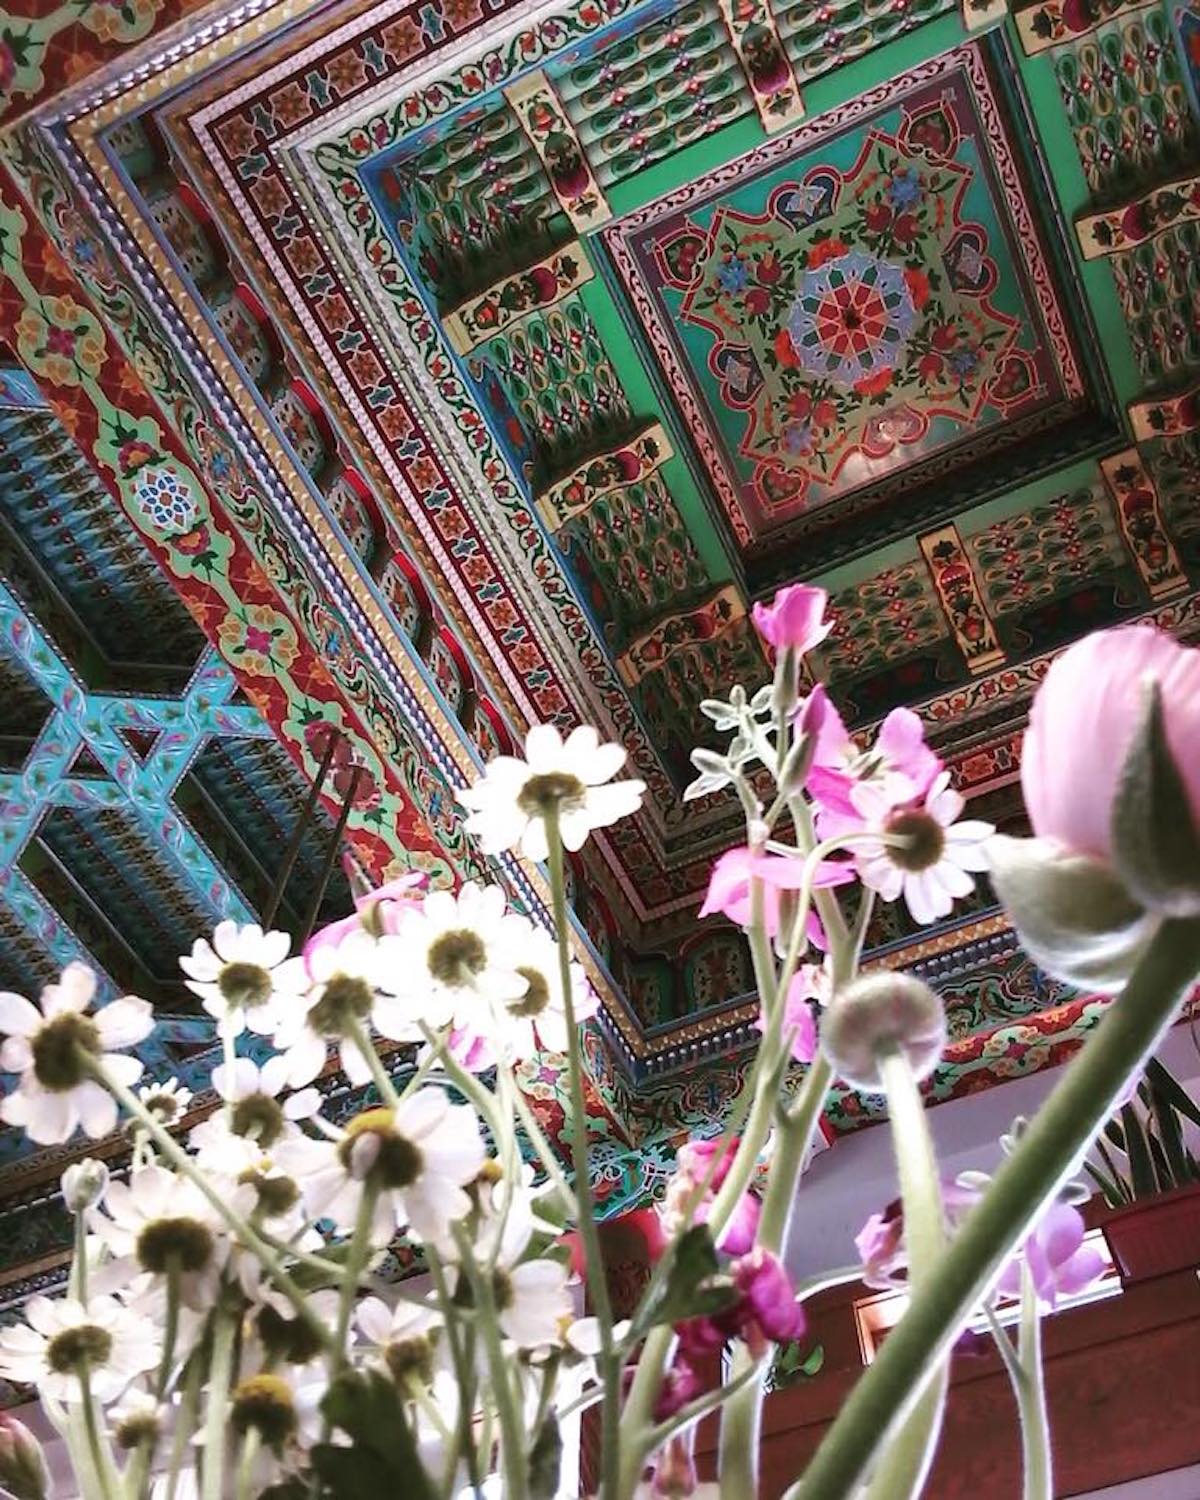 The carved teahouse ceiling